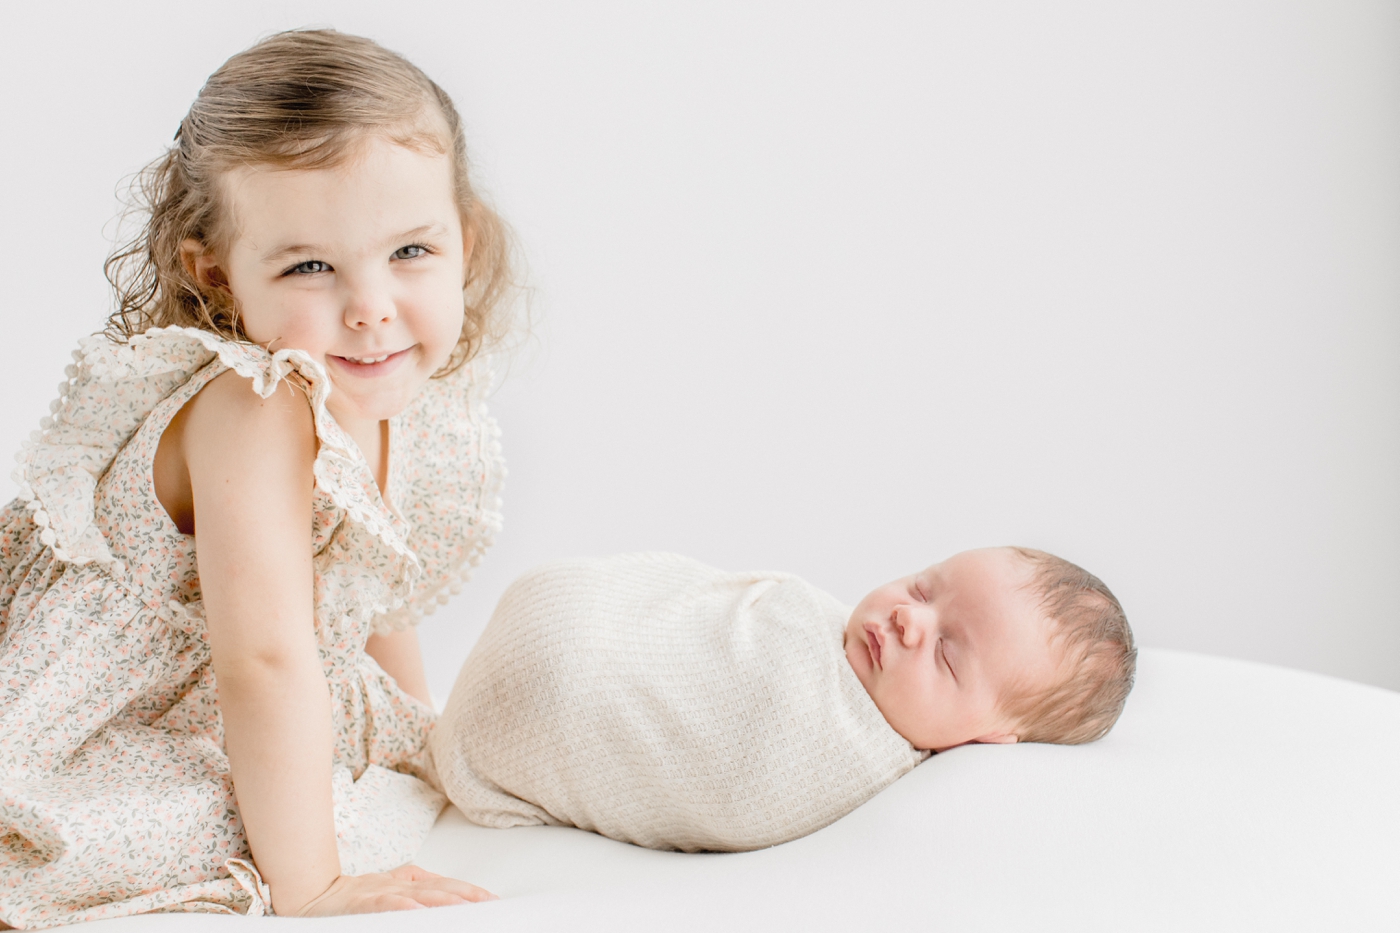 Toddler smiling next to baby brother during newborn session. Photo by Austin Newborn Photographer, Sana Ahmed Photography.